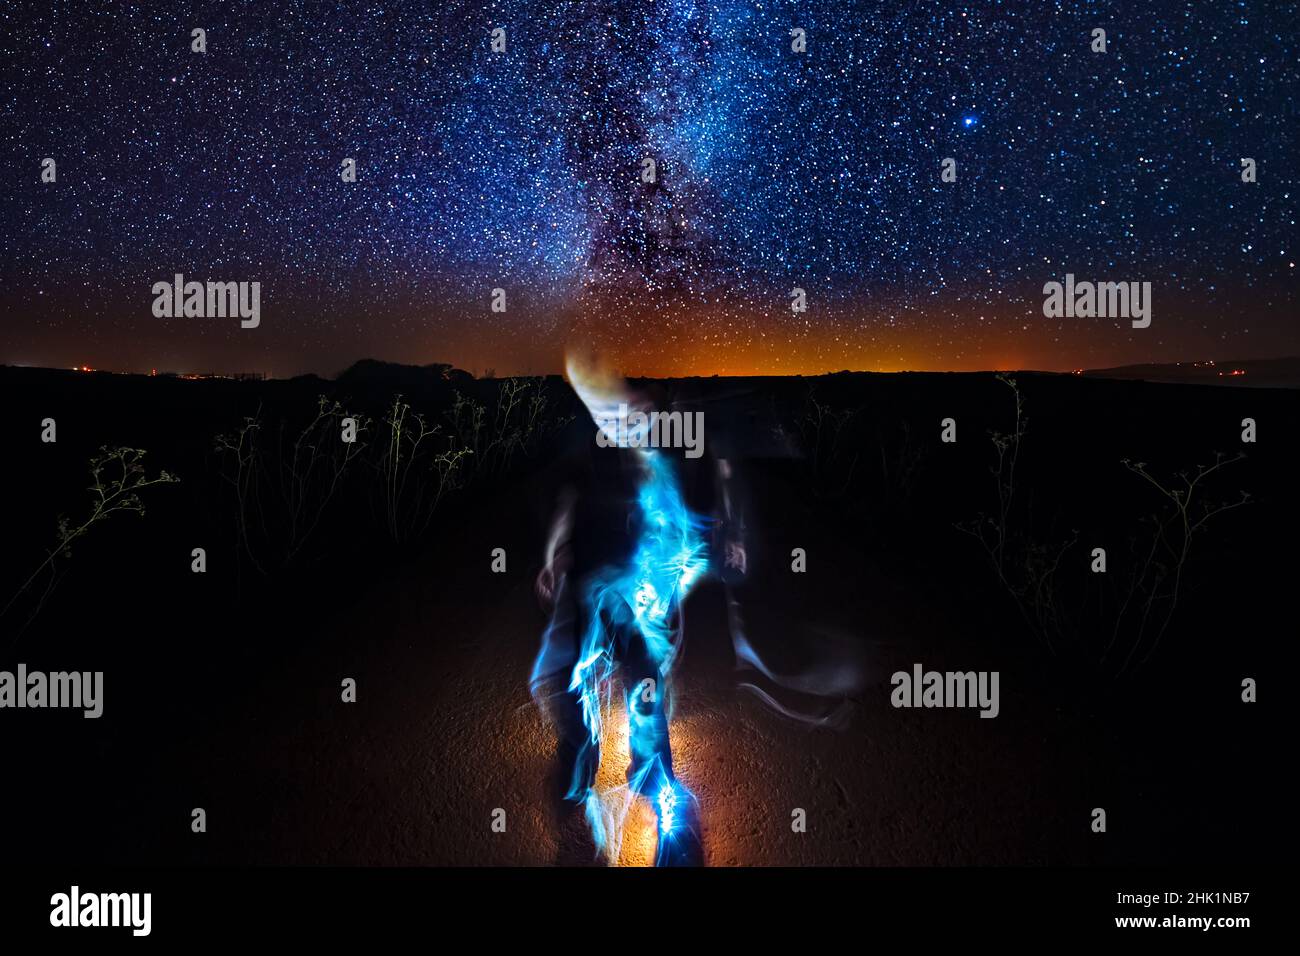 Extraterrestrial Alien Entity with starry sky in background Stock Photo